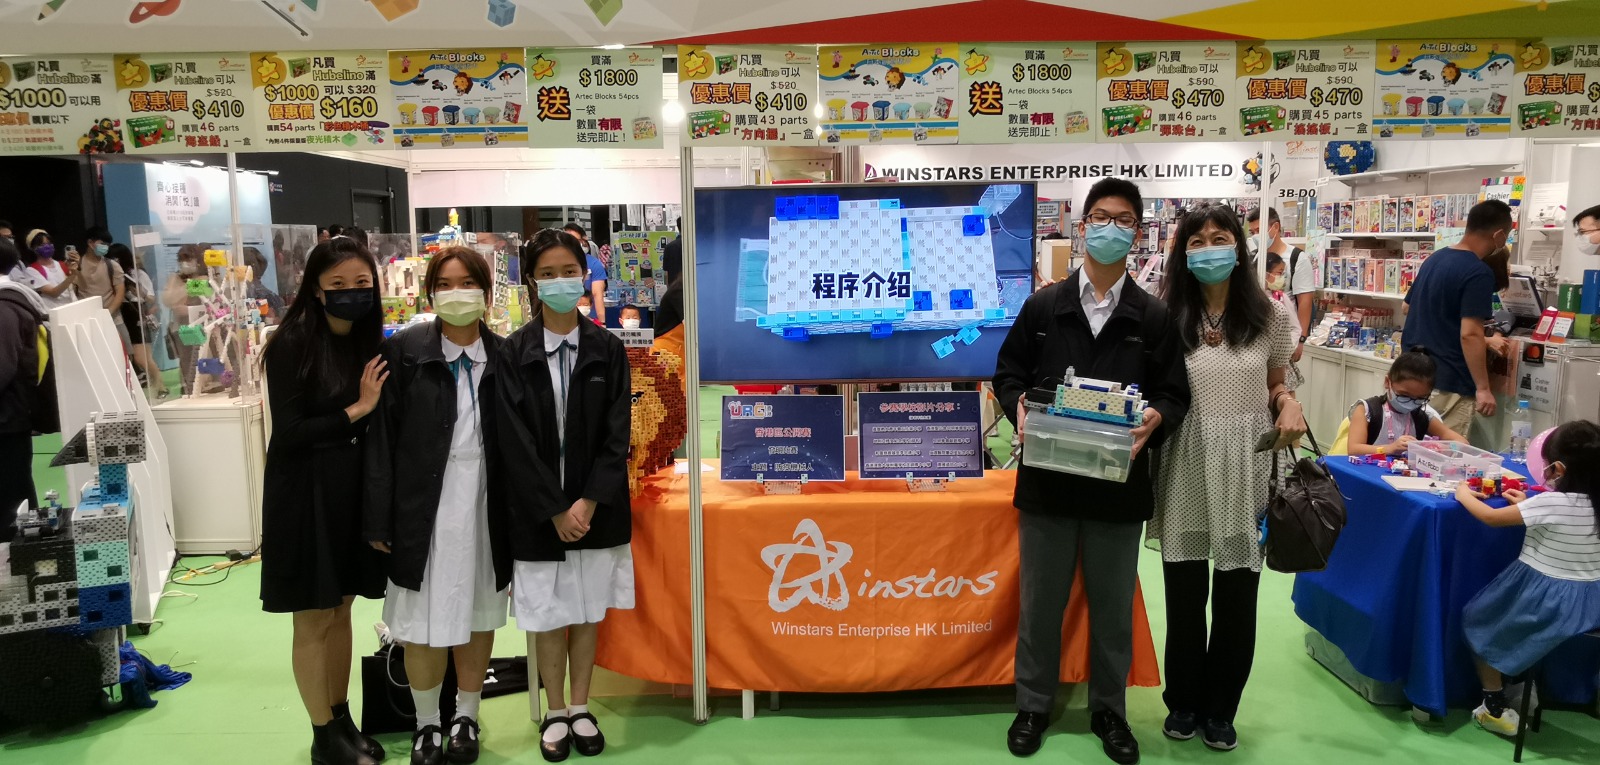 URC Little Inventors - Epidemic Prevention Robot Sharing Session at the Hong Kong Book Fair 2021